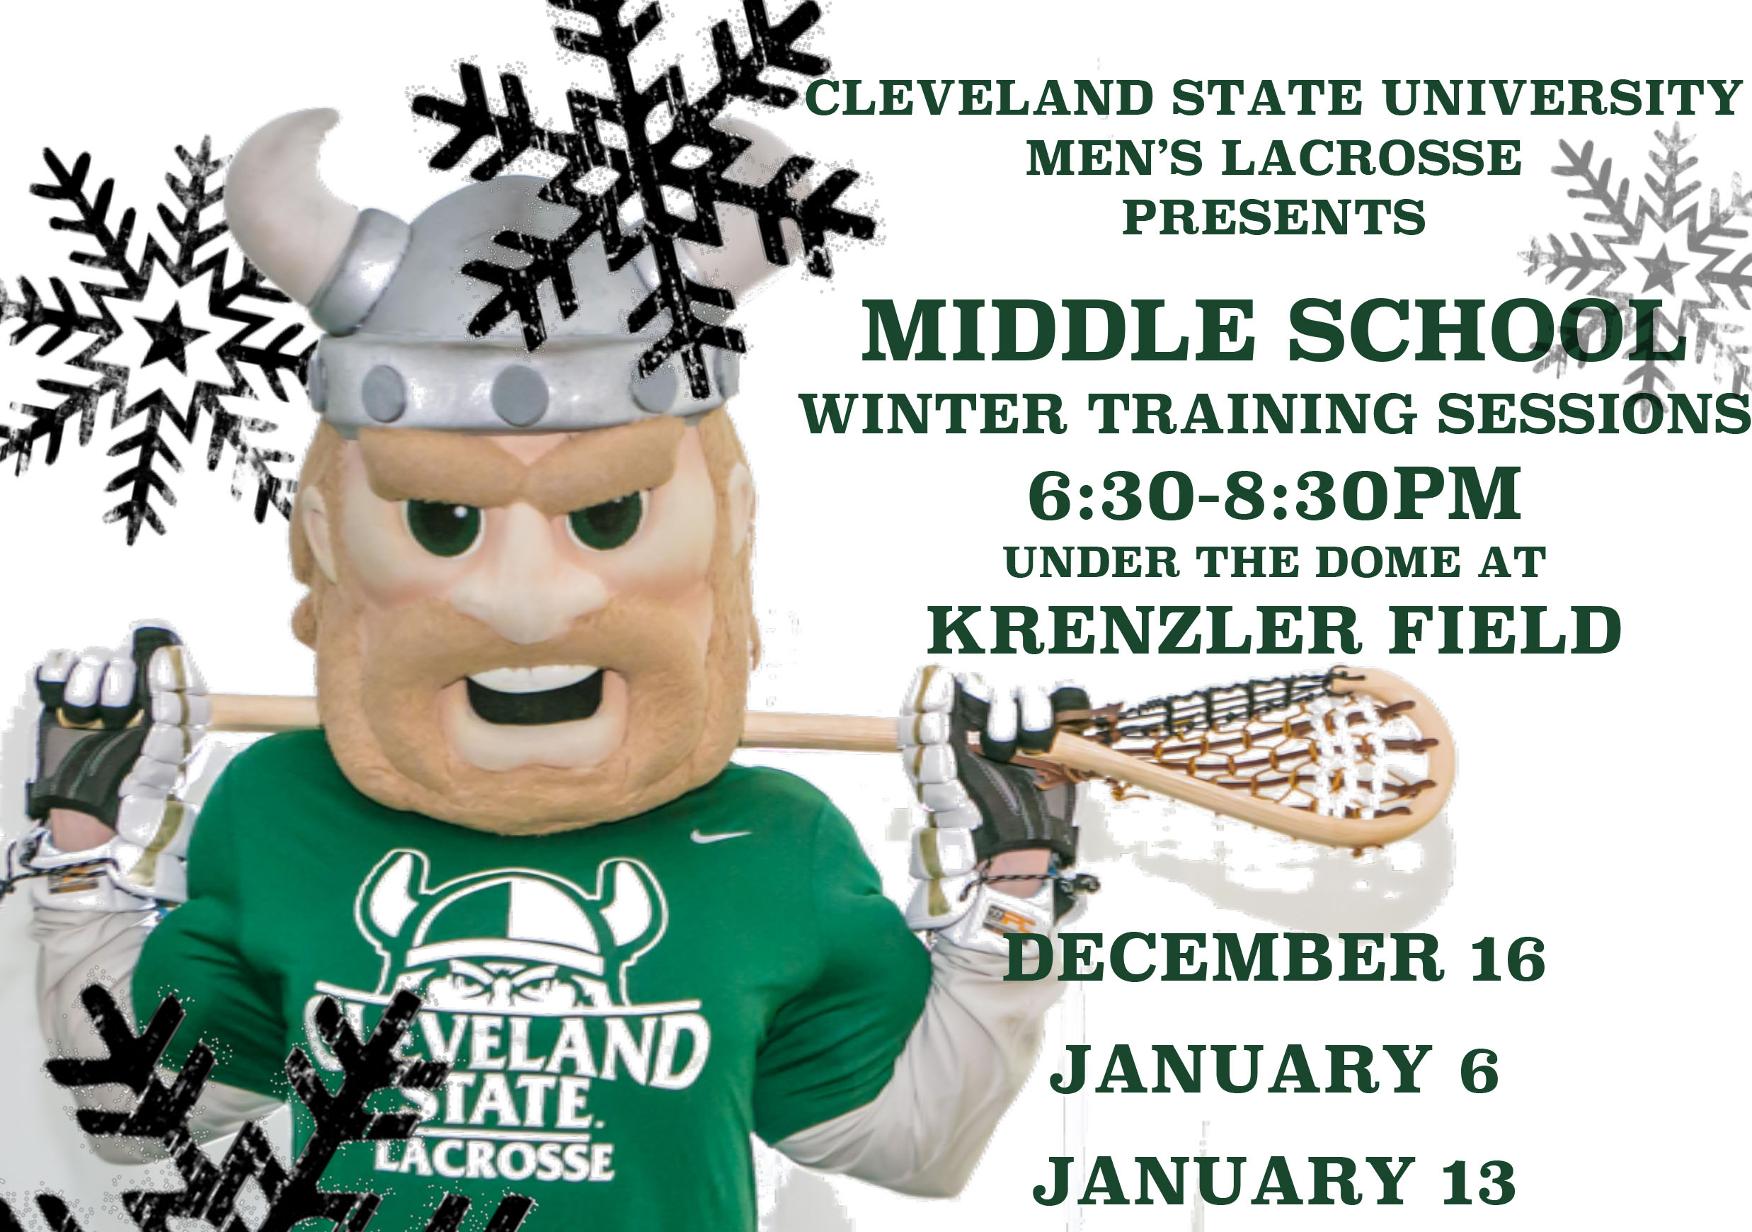 CSU Lacrosse to Host Three Middle School Winter Training Sessions